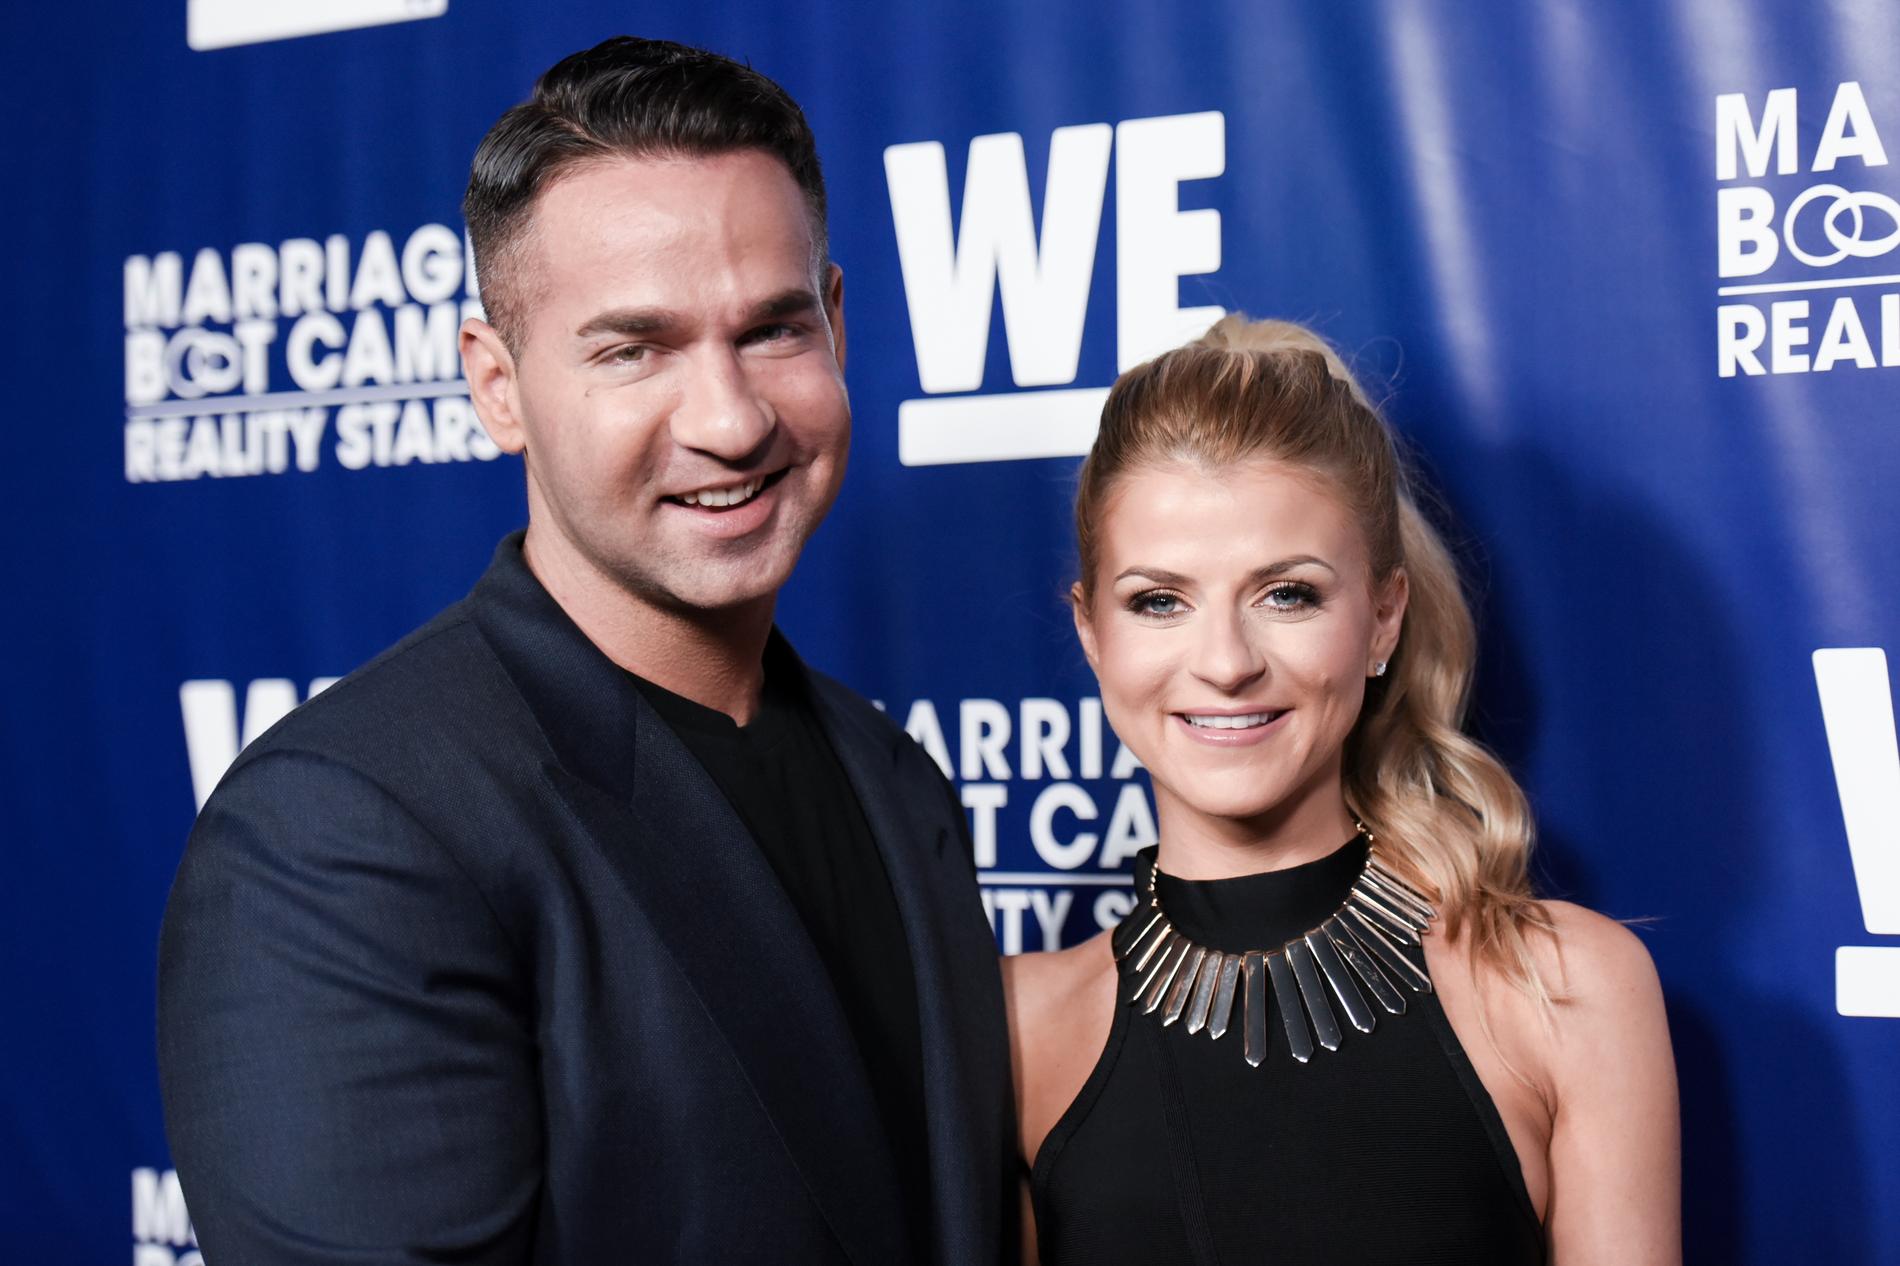 Mike ”The Situation” Sorrentino och Lauren Pesce Sorrentino.